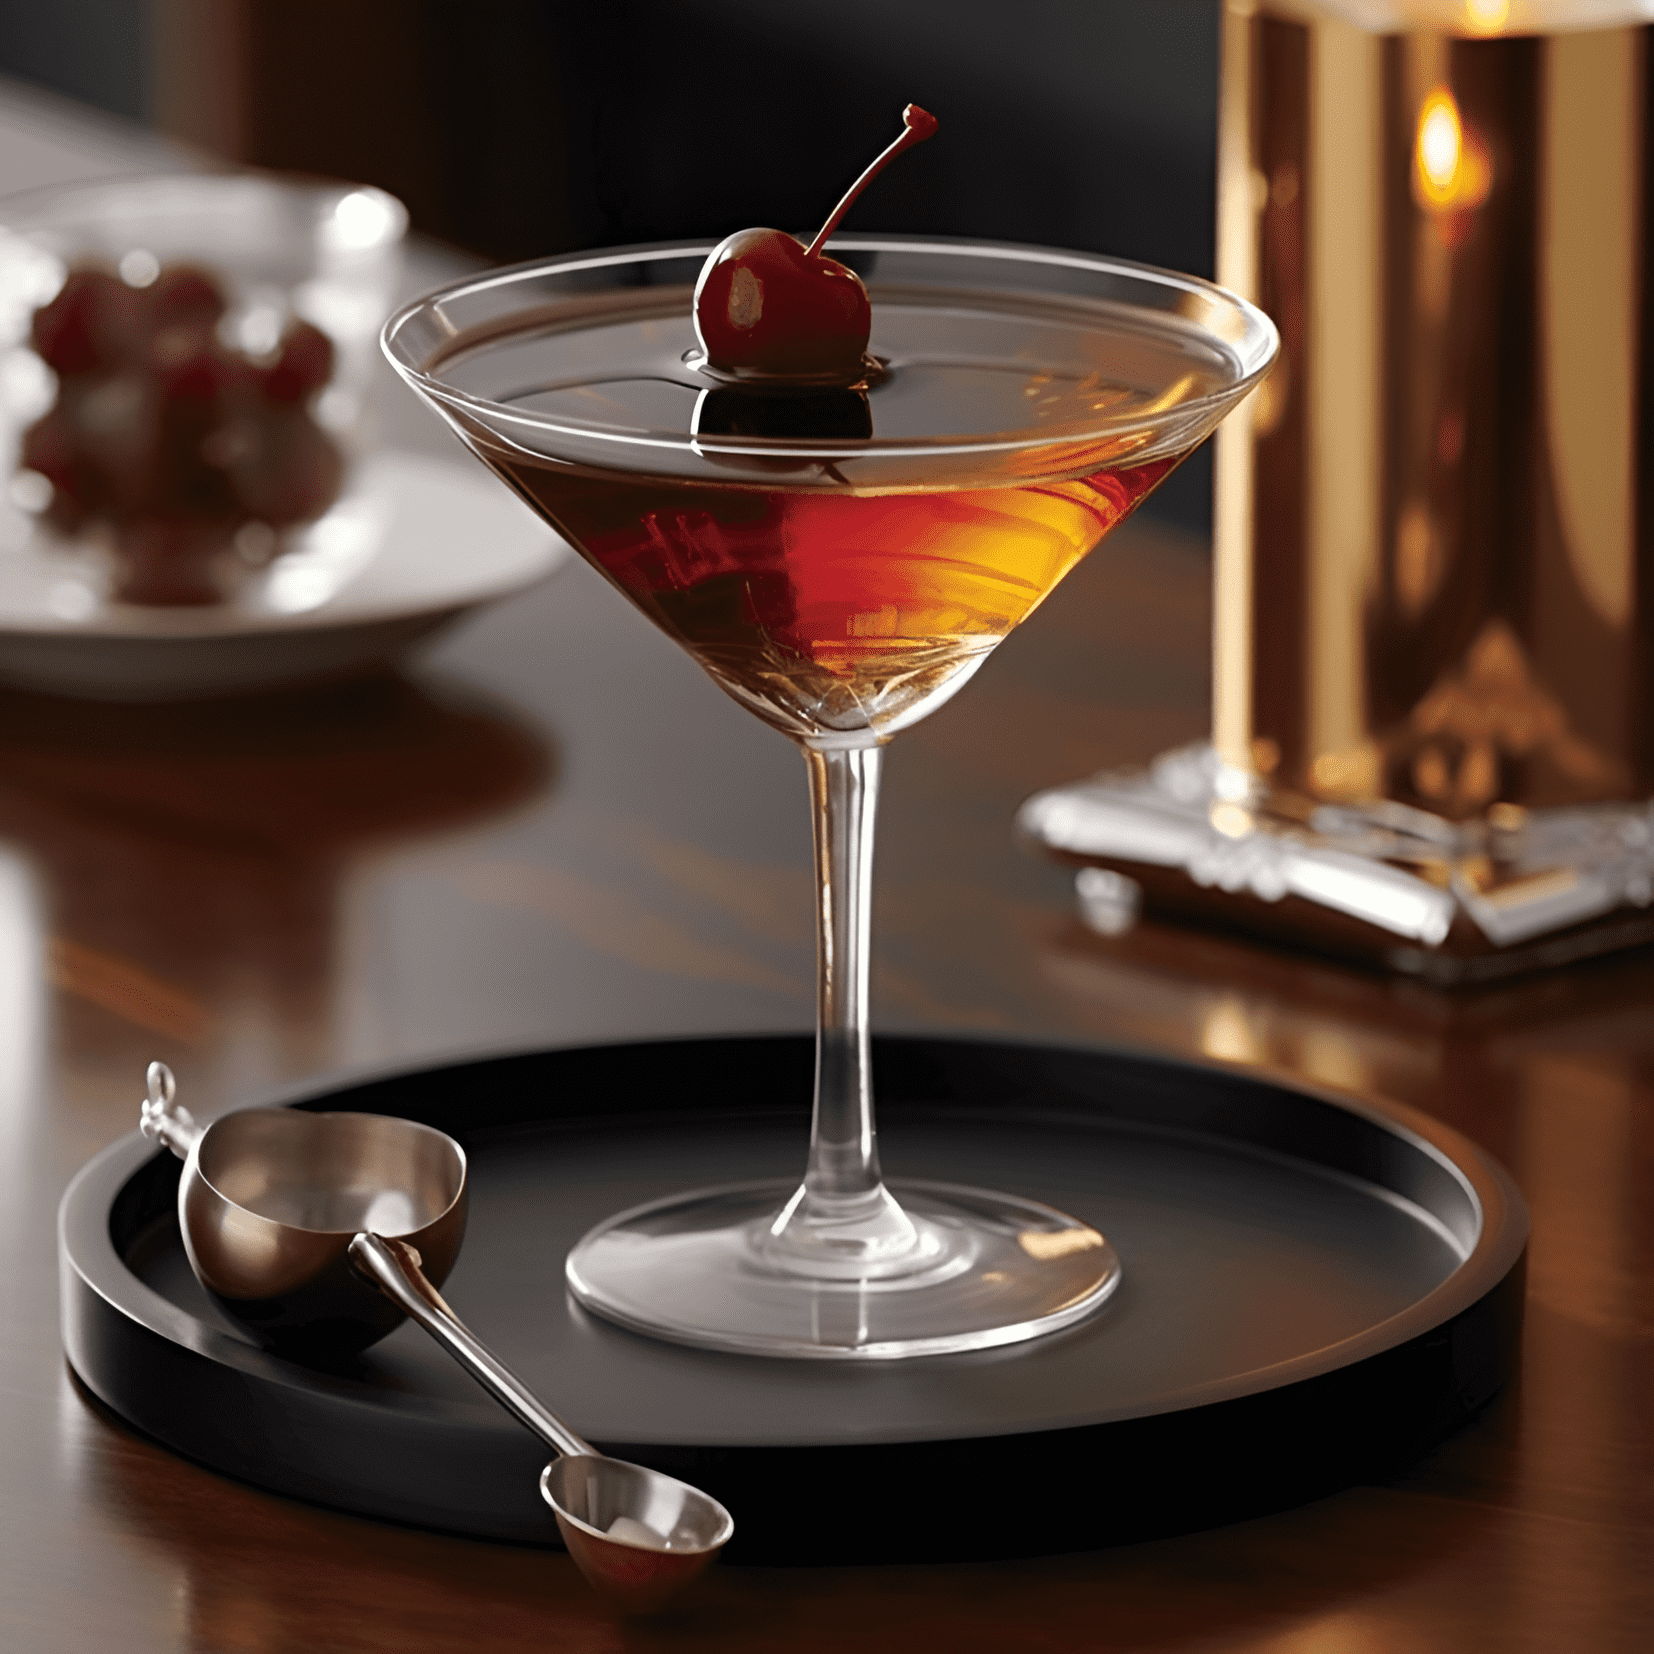 Black Manhattan Cocktail Recipe - The Black Manhattan has a rich, bittersweet taste with a smooth, velvety texture. The combination of rye whiskey and Averna amaro creates a complex flavor profile with notes of caramel, chocolate, and herbs. The addition of bitters adds depth and a slight spiciness to the drink.